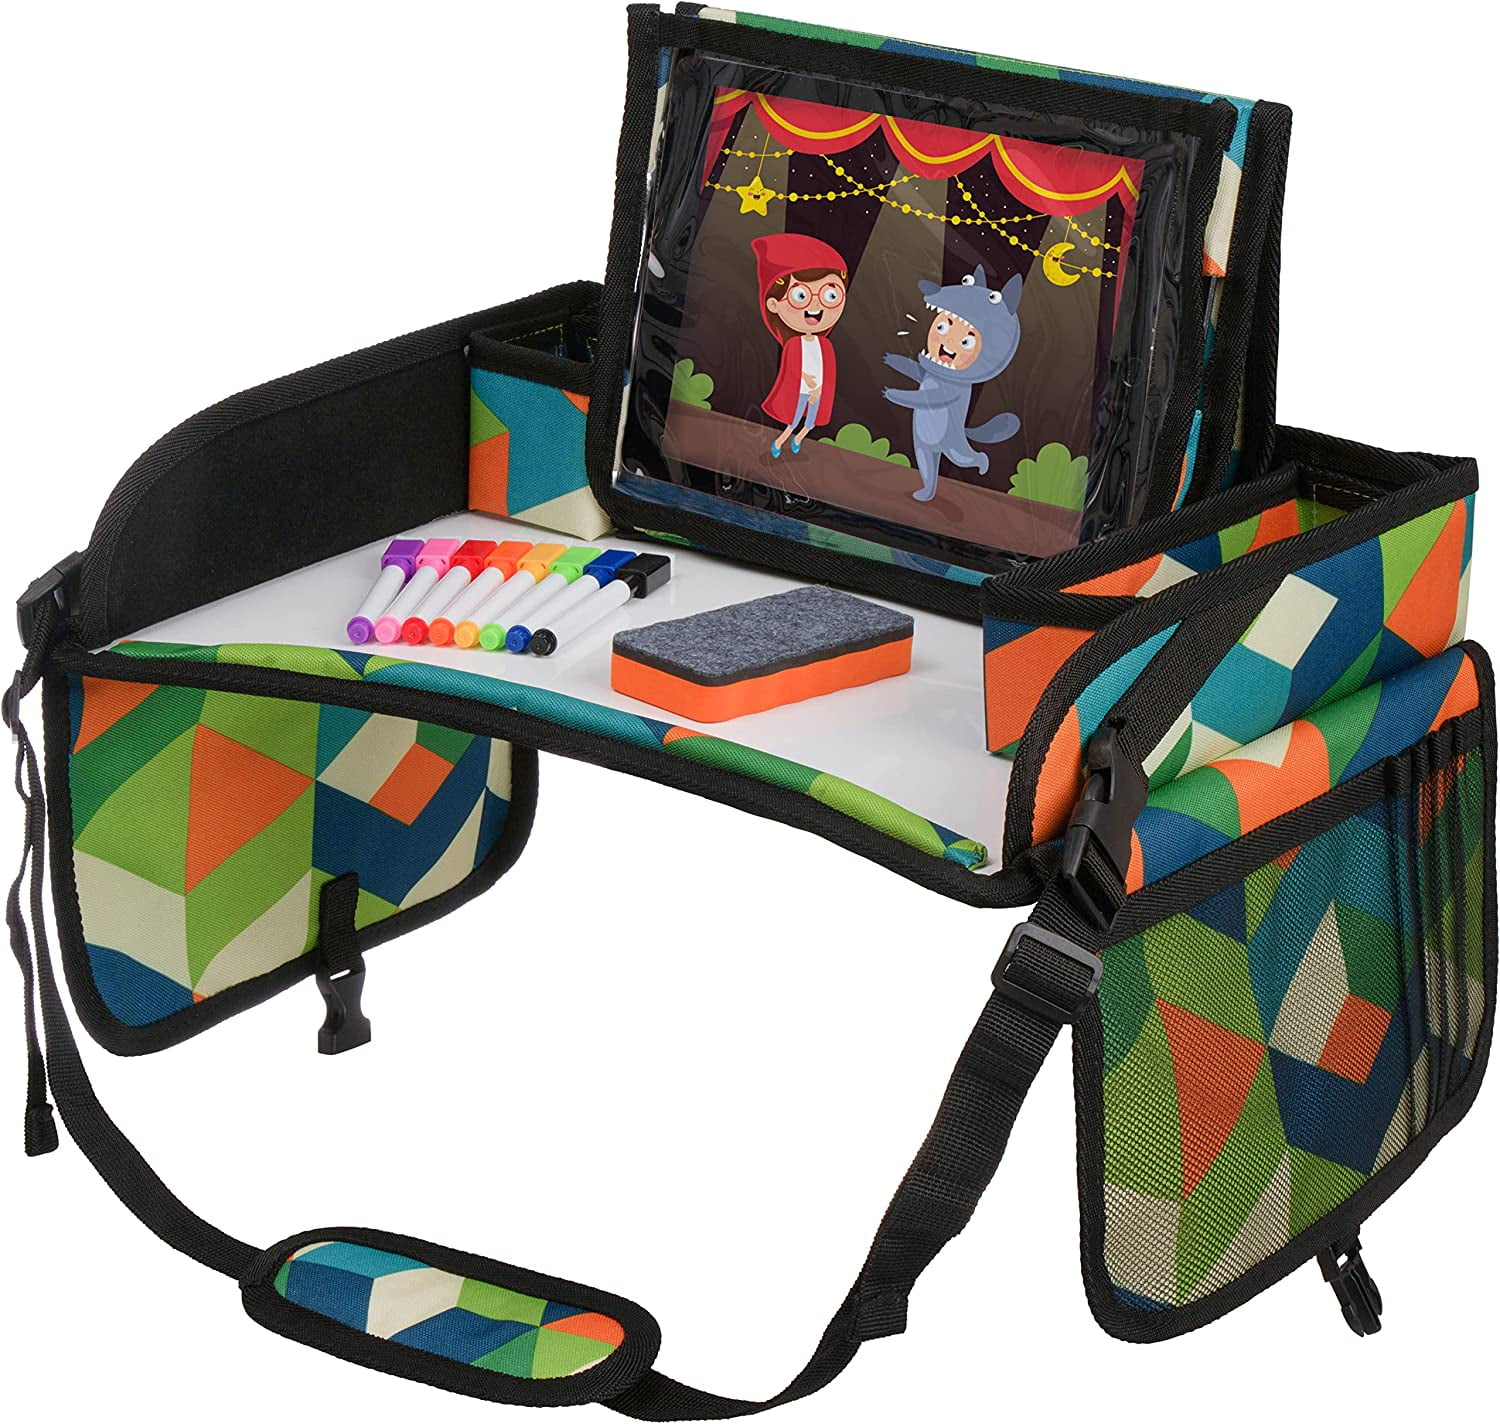 Kids Travel Lap Tray By RazzTots – Children's Portable Lap Activity Desk  With Cup Holder & Mesh Pockets, Waterproof Surface with PVC Board, Eating  & Playing &…